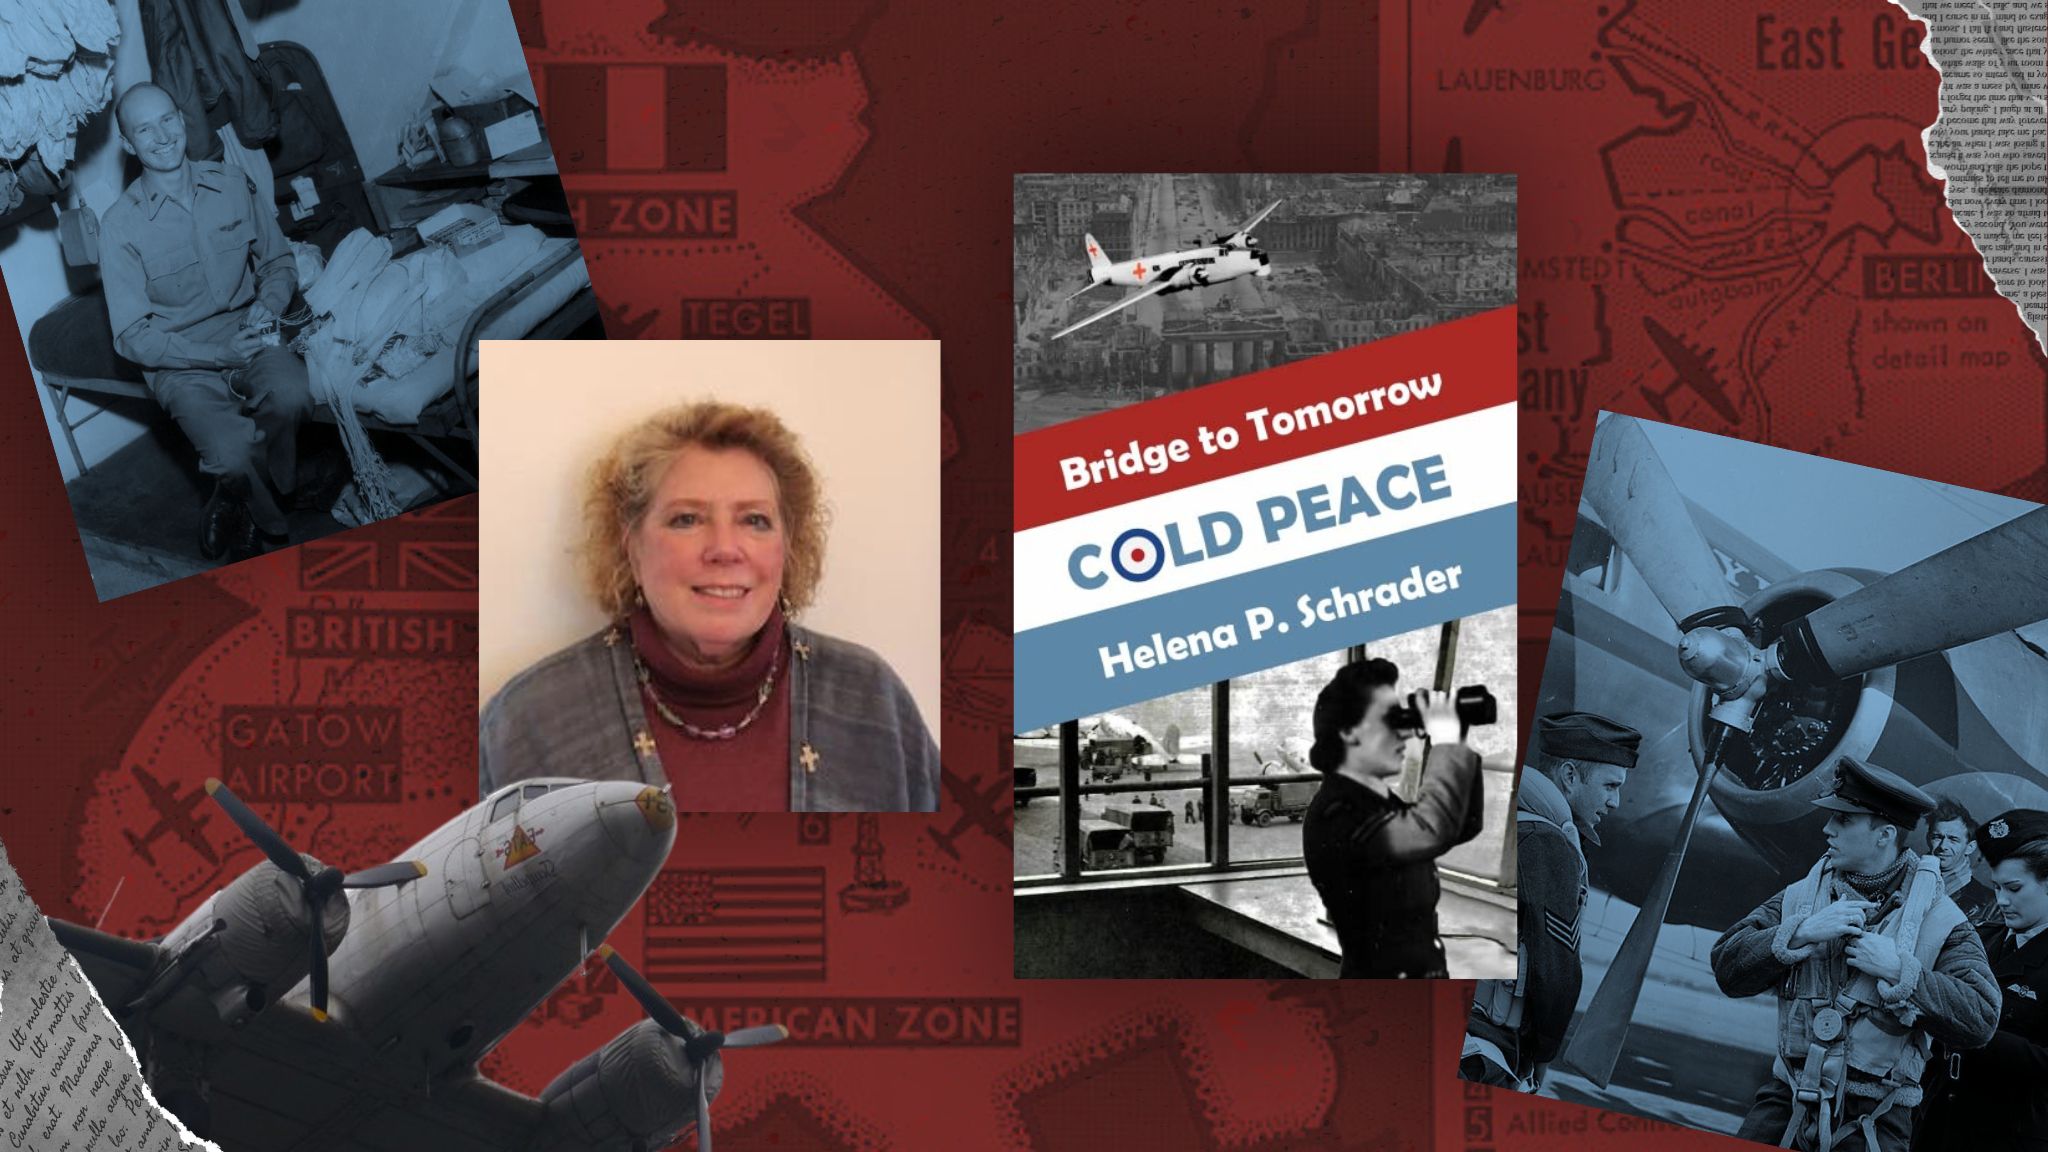 Cold Peace Bridge to Tomorrow by Helena P Schrader